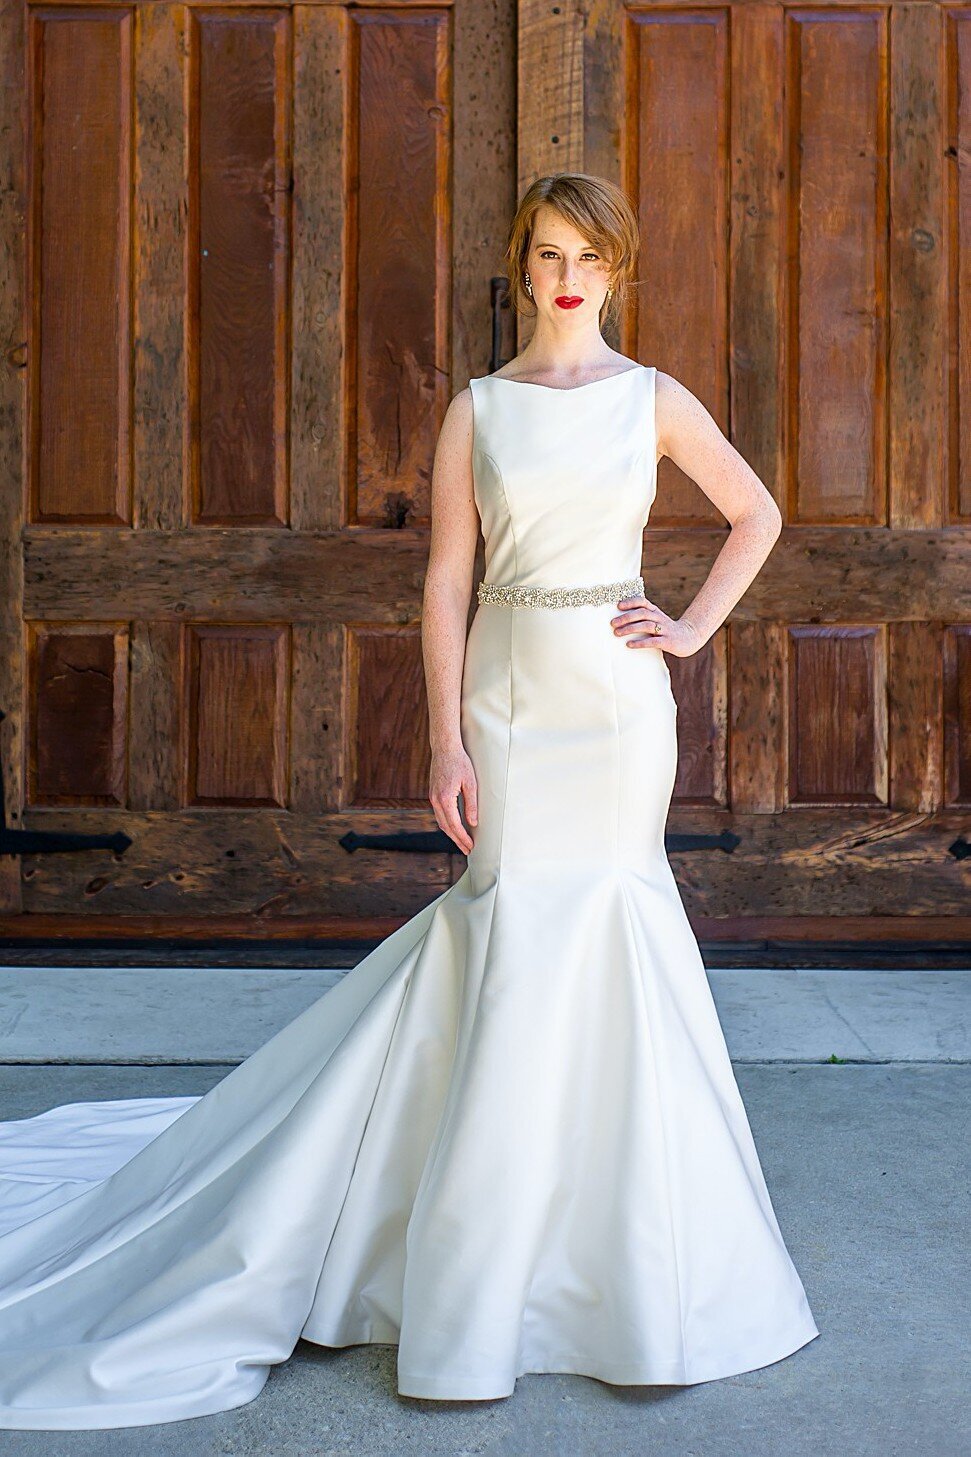 Eva is a mikado wedding gown in a fit-and-flare silhouette by indie bridal designer Edith Elan.